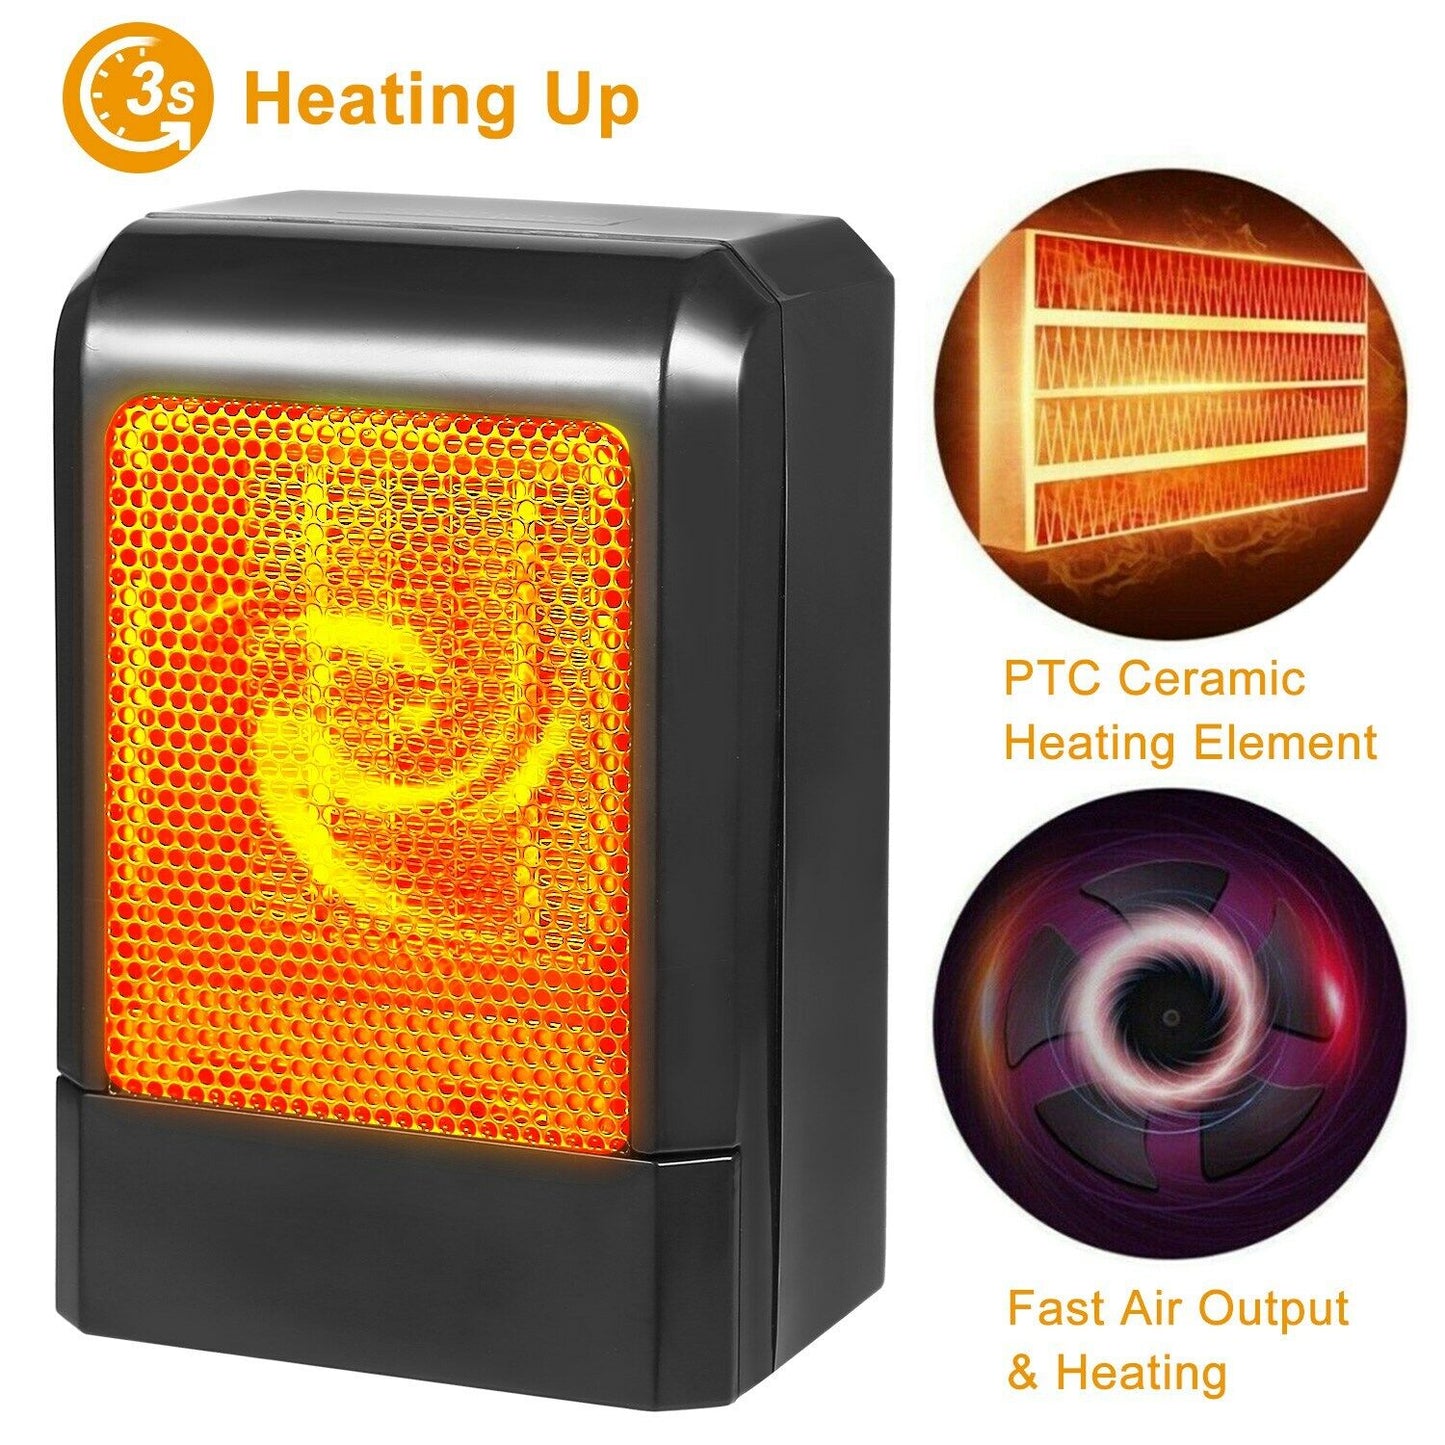 500W Mini Ceramic Electric Heater Home Office Space Heating Portable Fan Silent